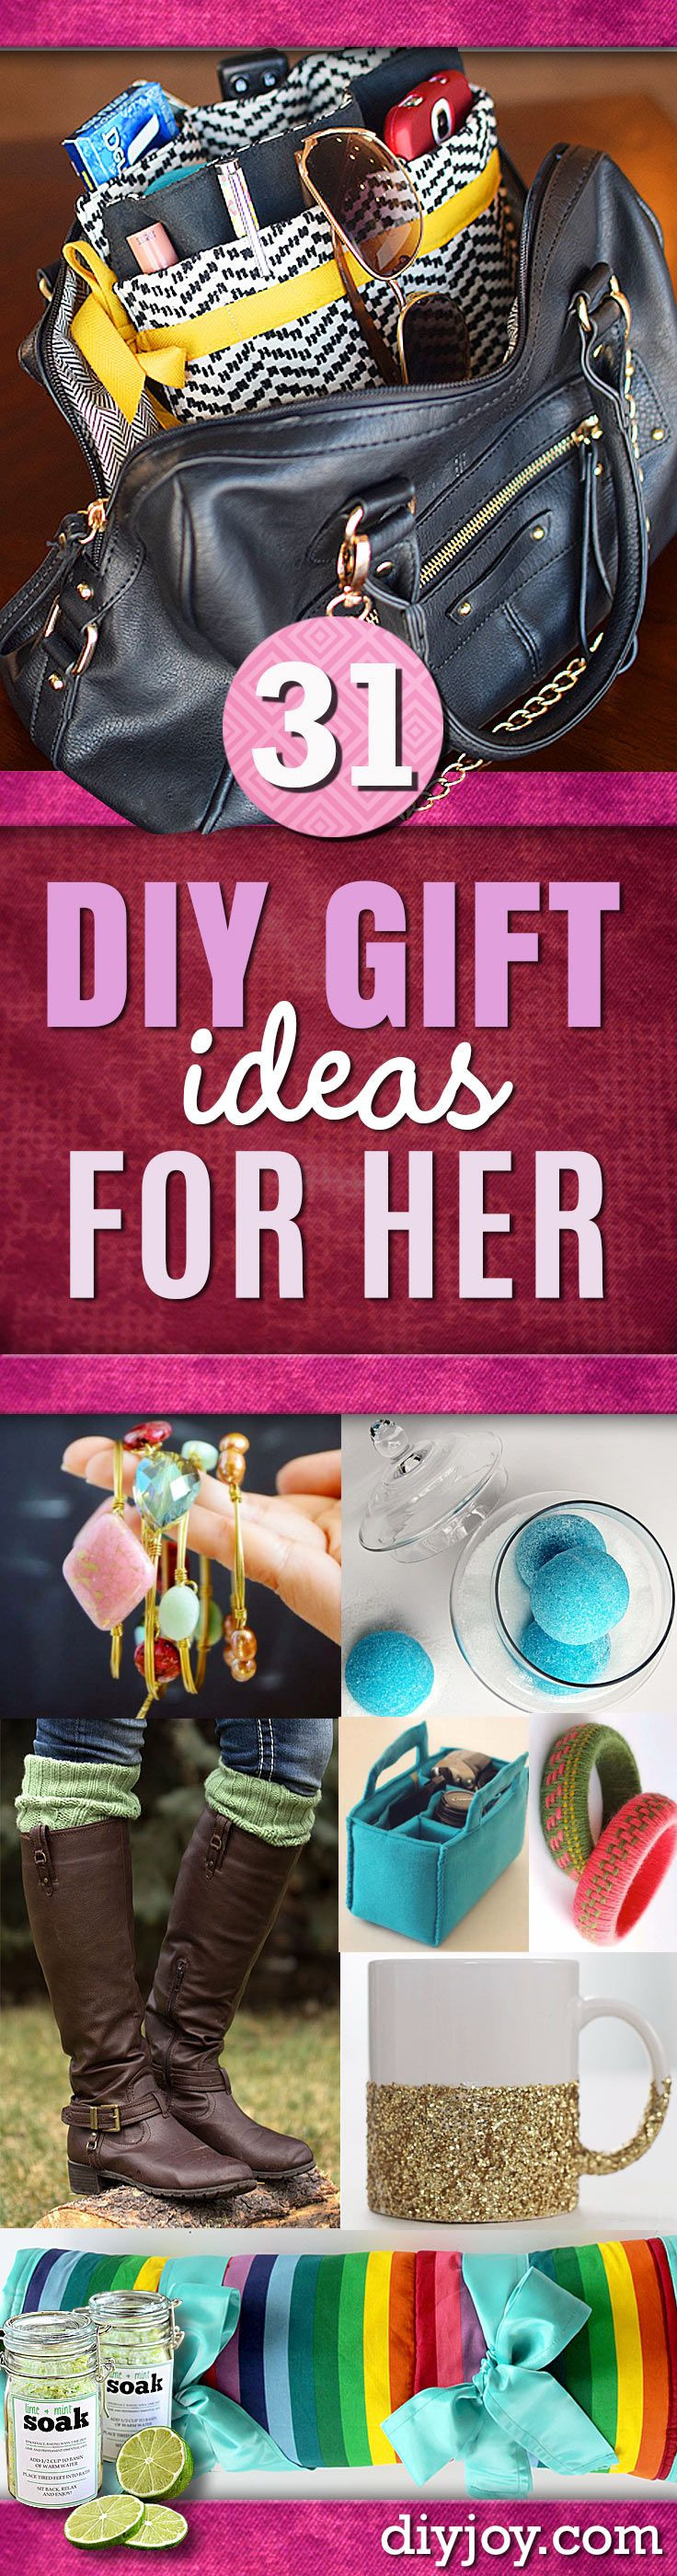 DIY Christmas Gifts For Girlfriend
 17 Best ideas about Homemade Gifts For Girlfriend on